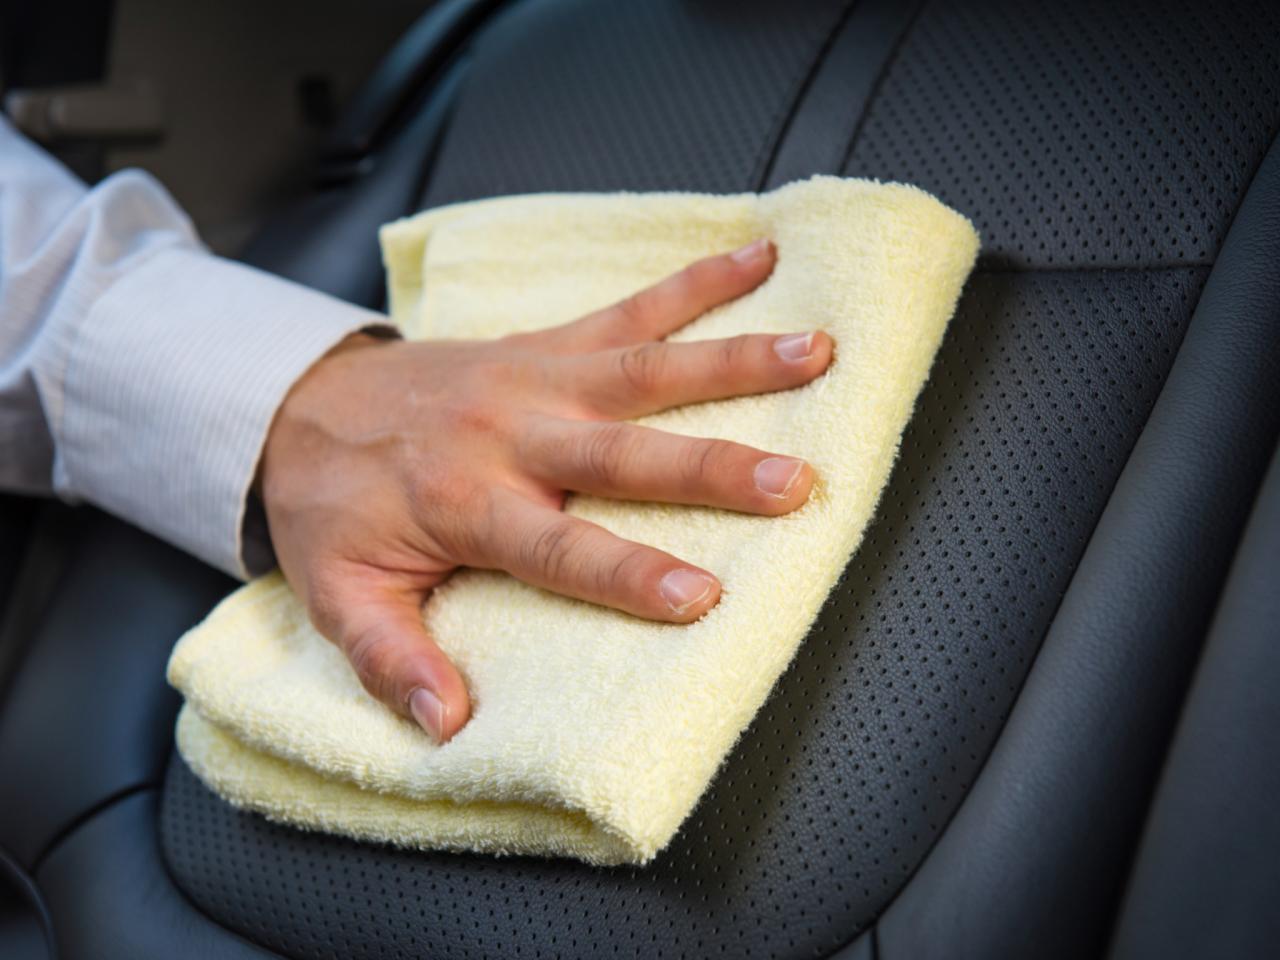 How To Clean Leather Car Seats - How To Wash My Car Seat Cover